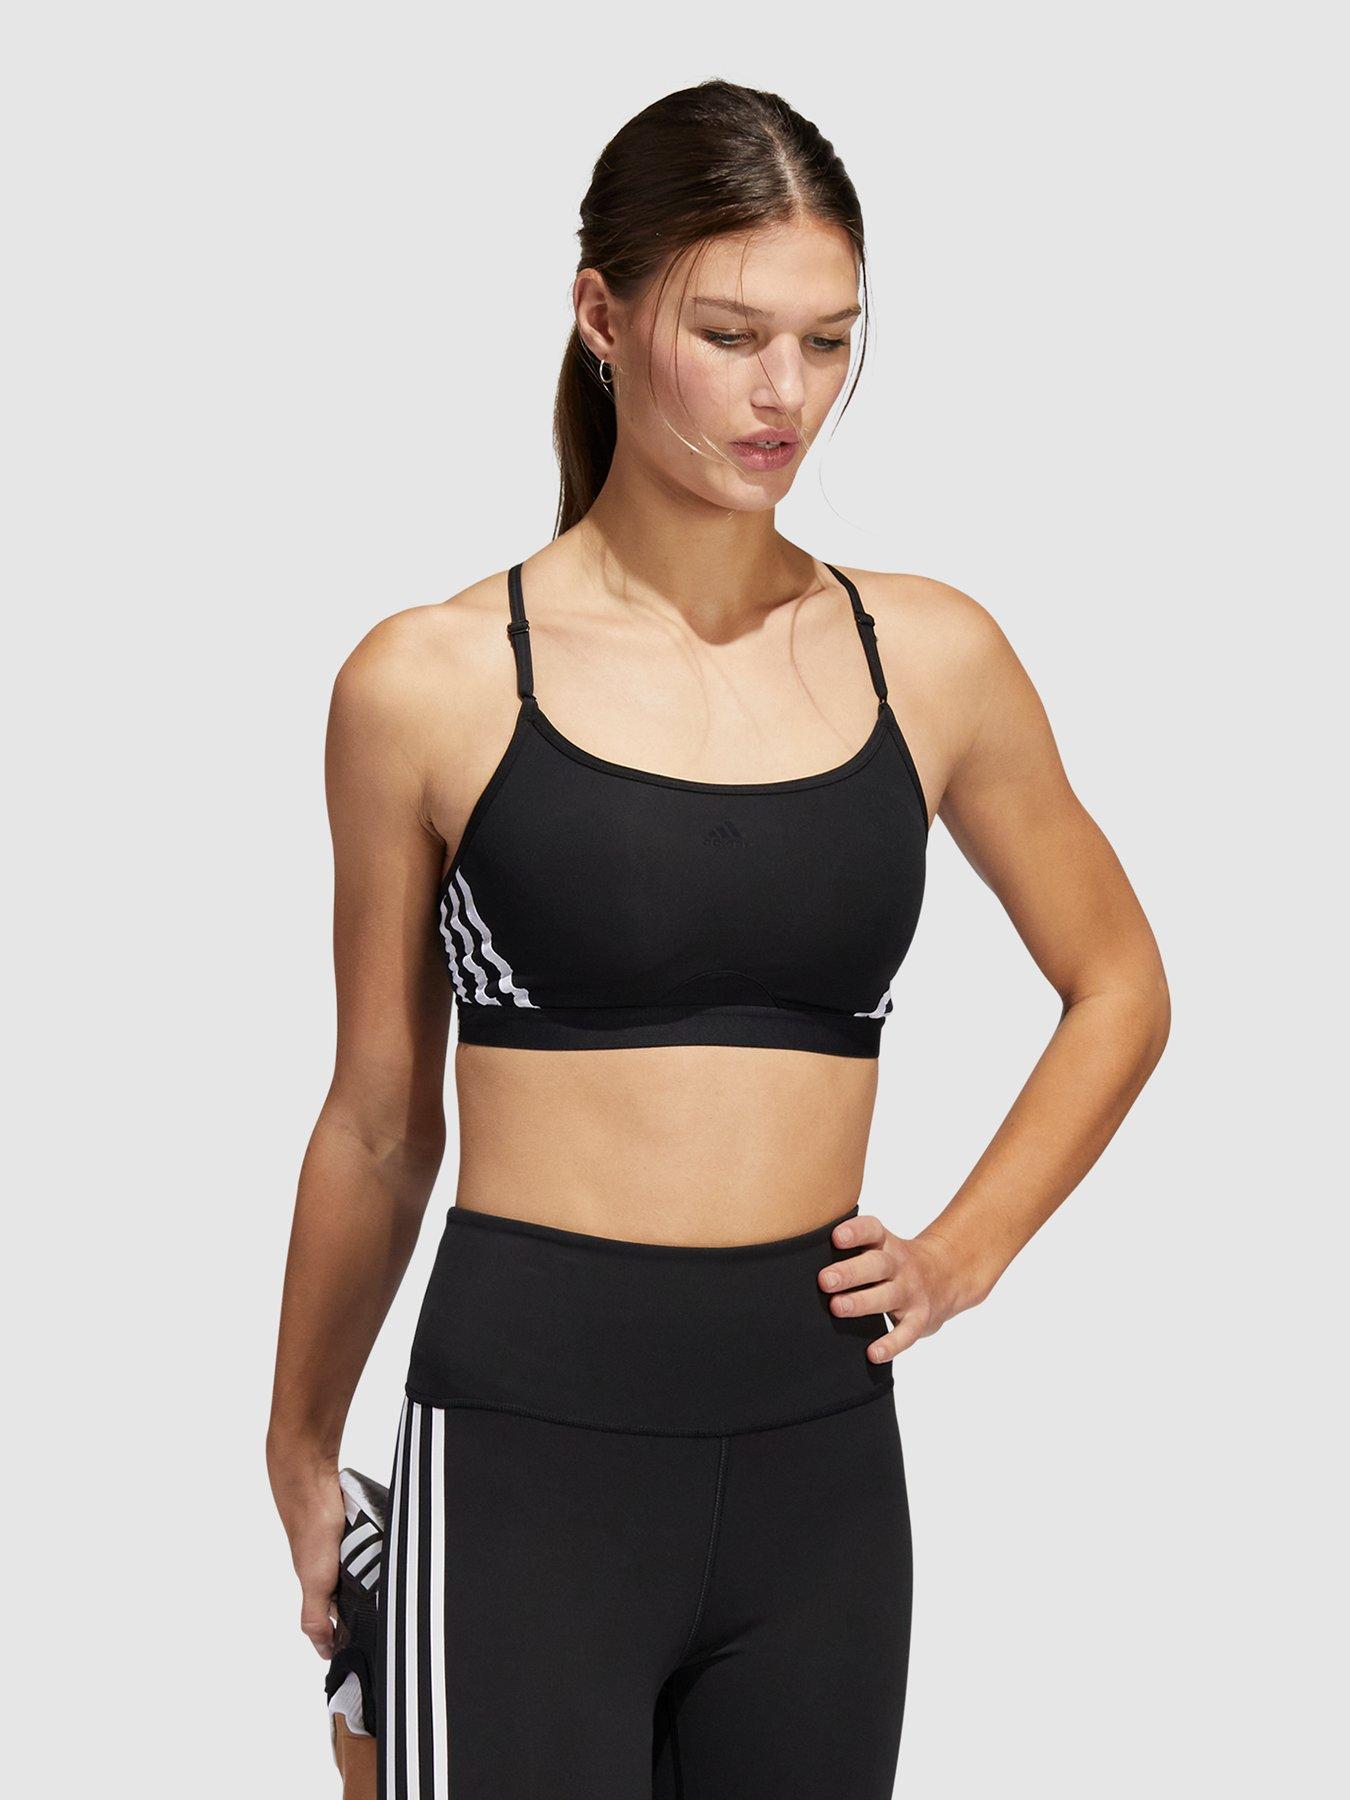 Buy ADIDAS Striped Polyester Fitted Womens Sports Bra